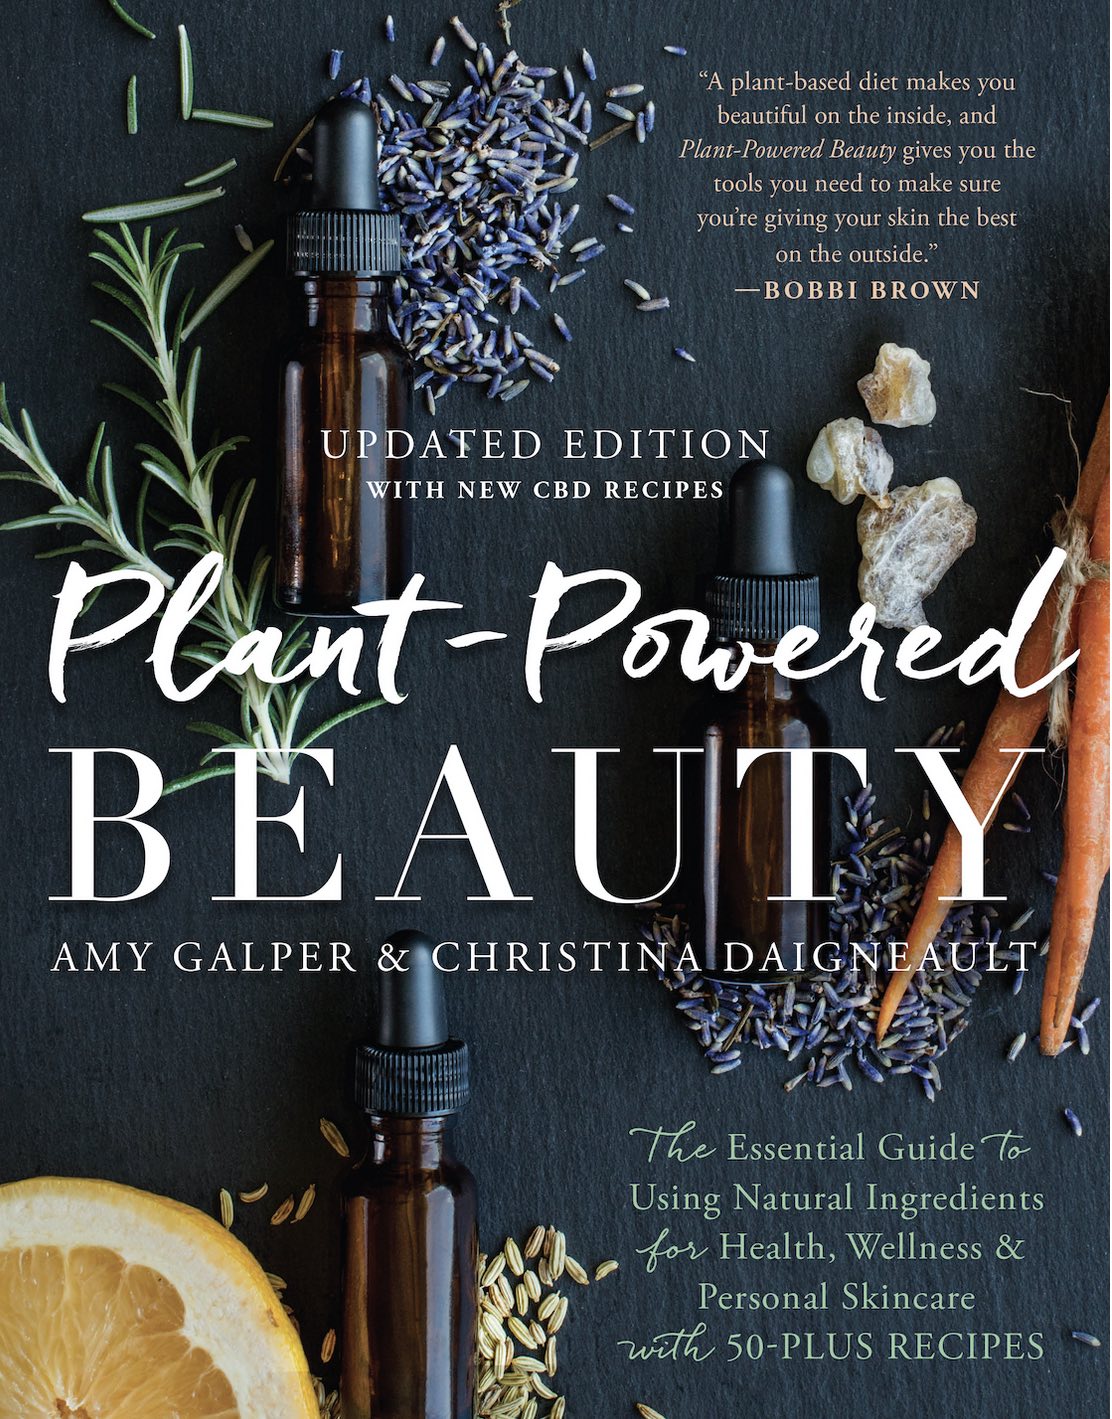 New Book Edition with CBD Beauty Recipes